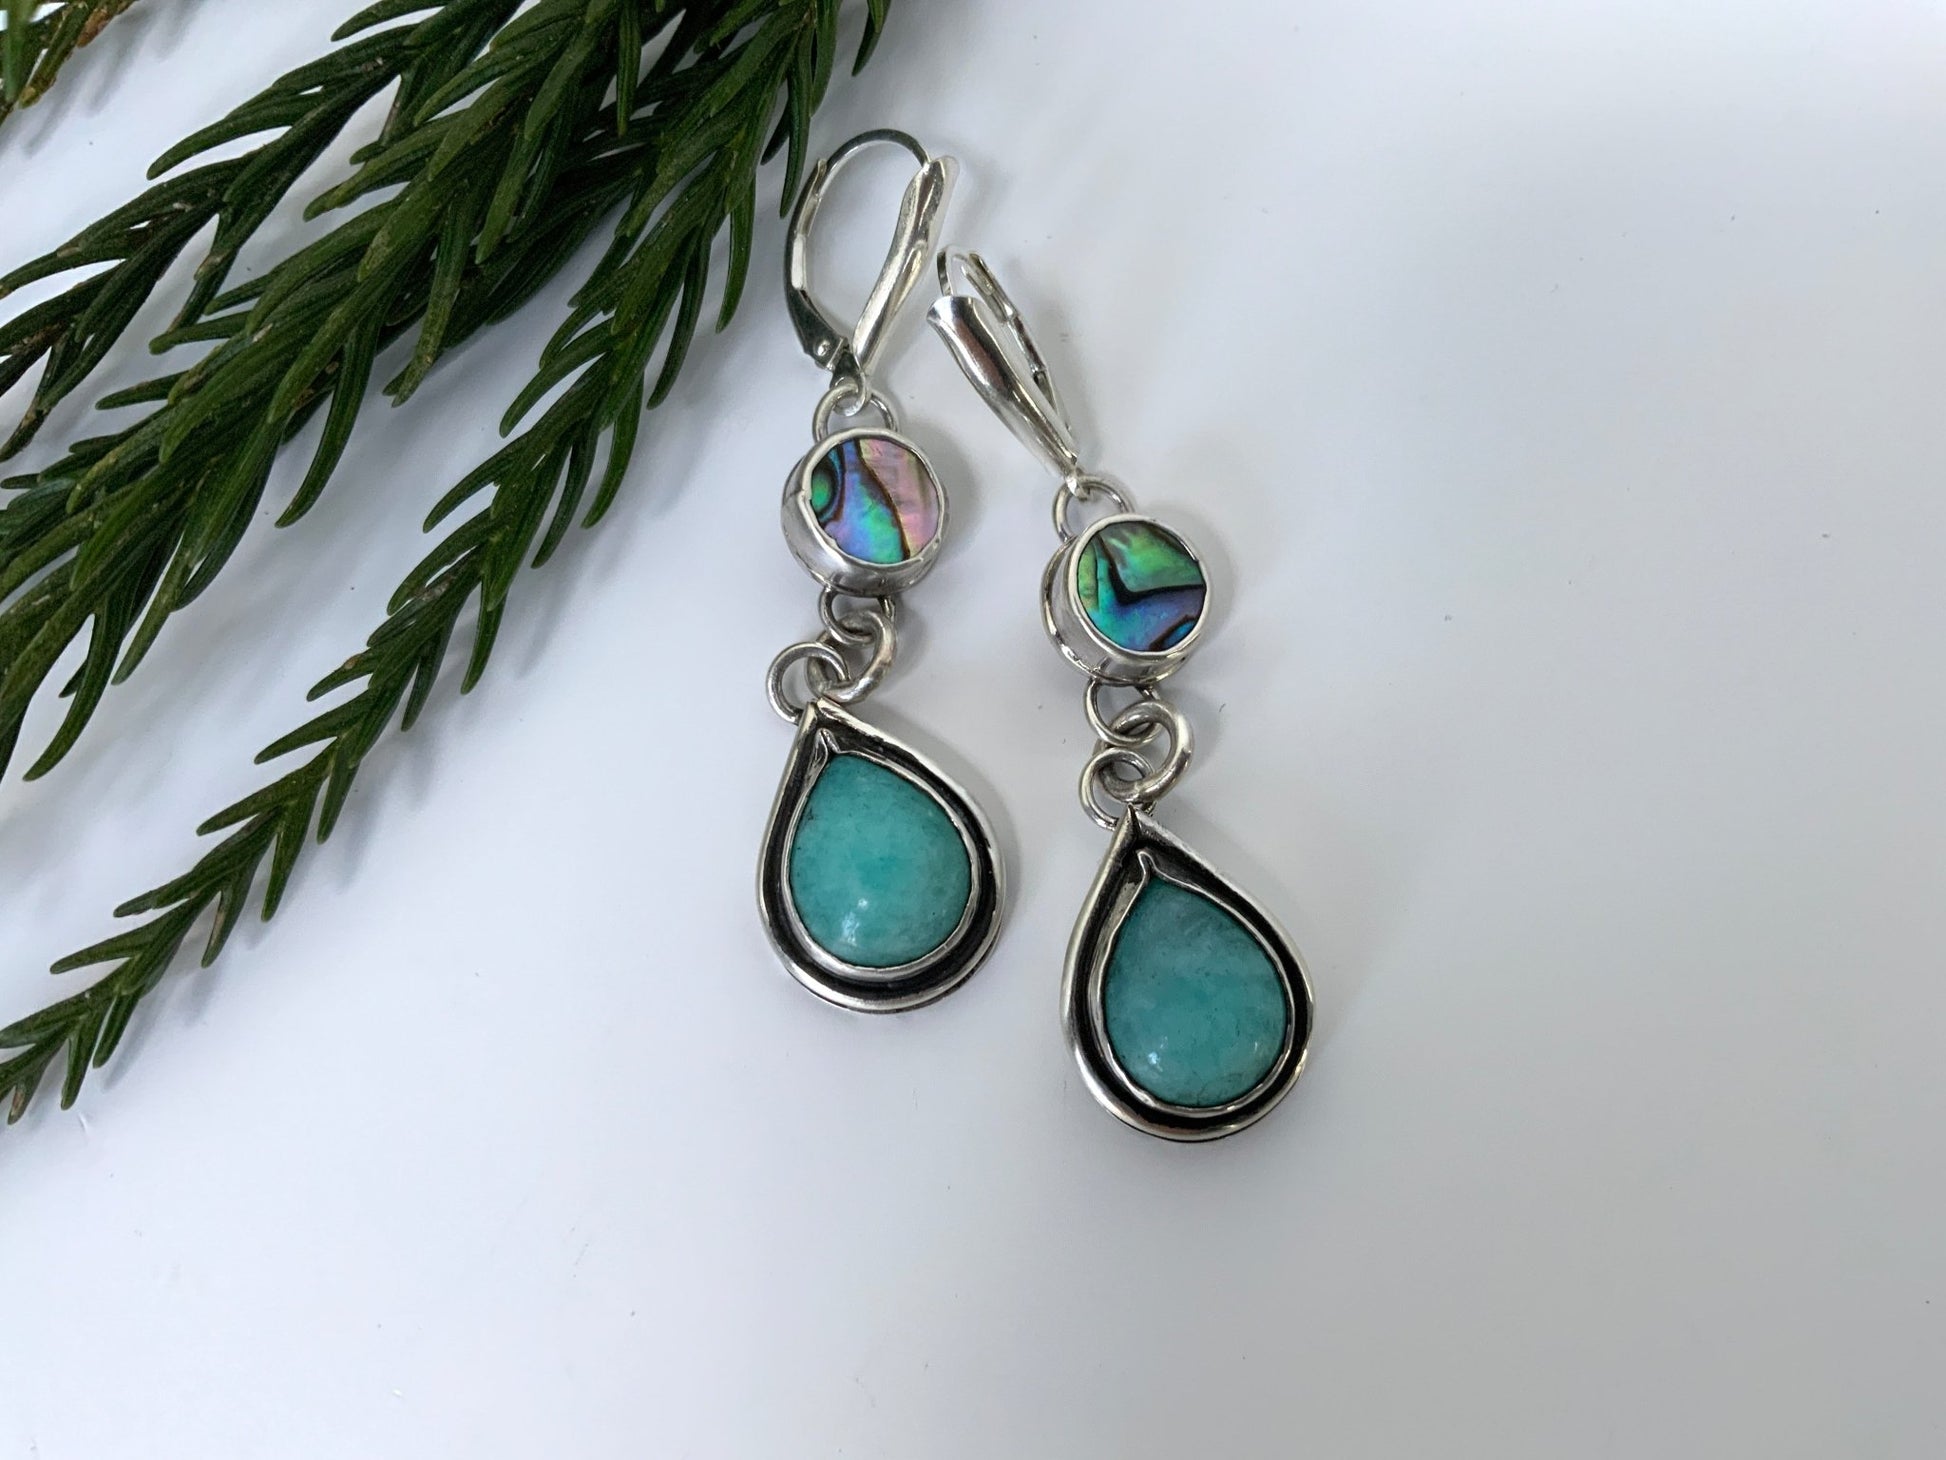 Amazonite and Abalone Drop Dangle Sterling Silver Earrings - Evitts Creek Arts